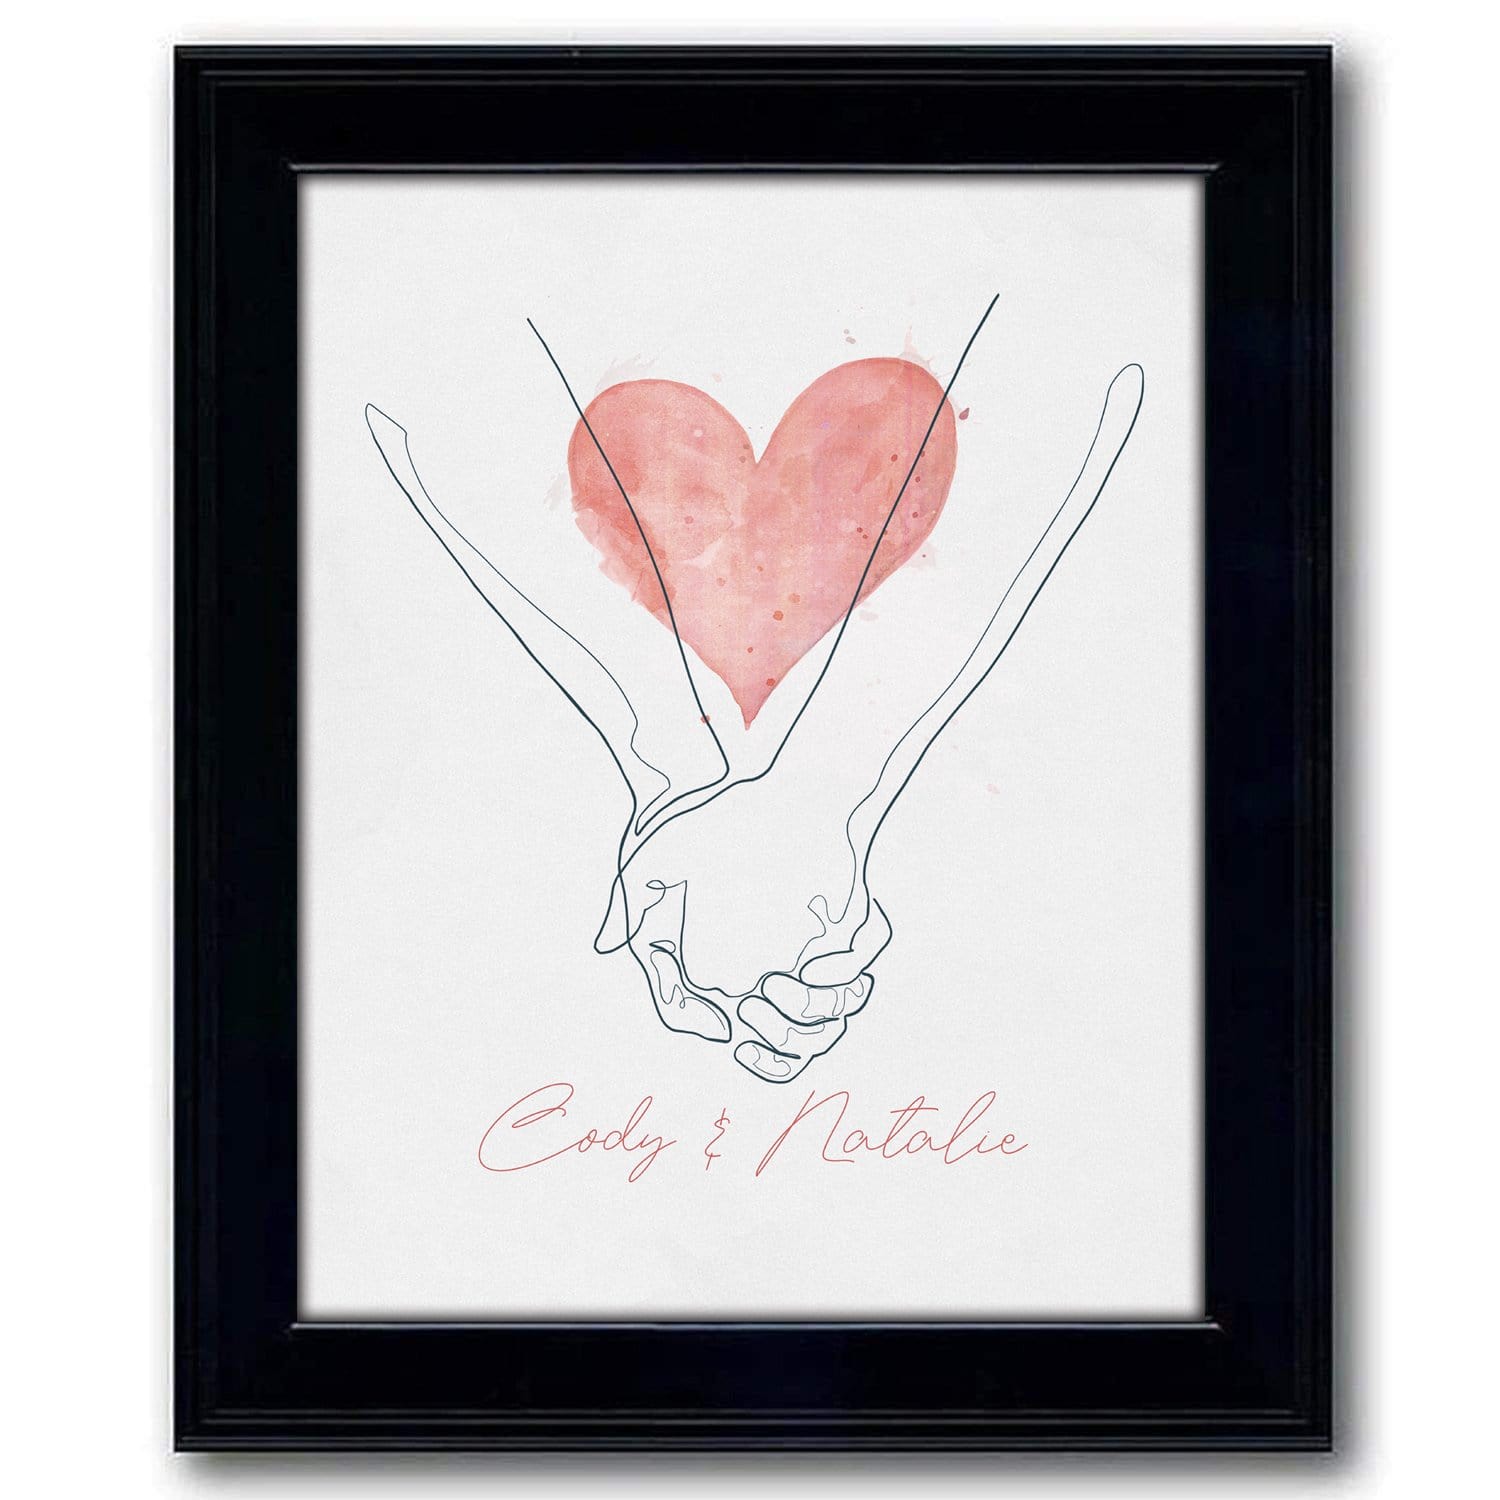 romantic personalized art - holding hands - romantic gift idea for any special occasion